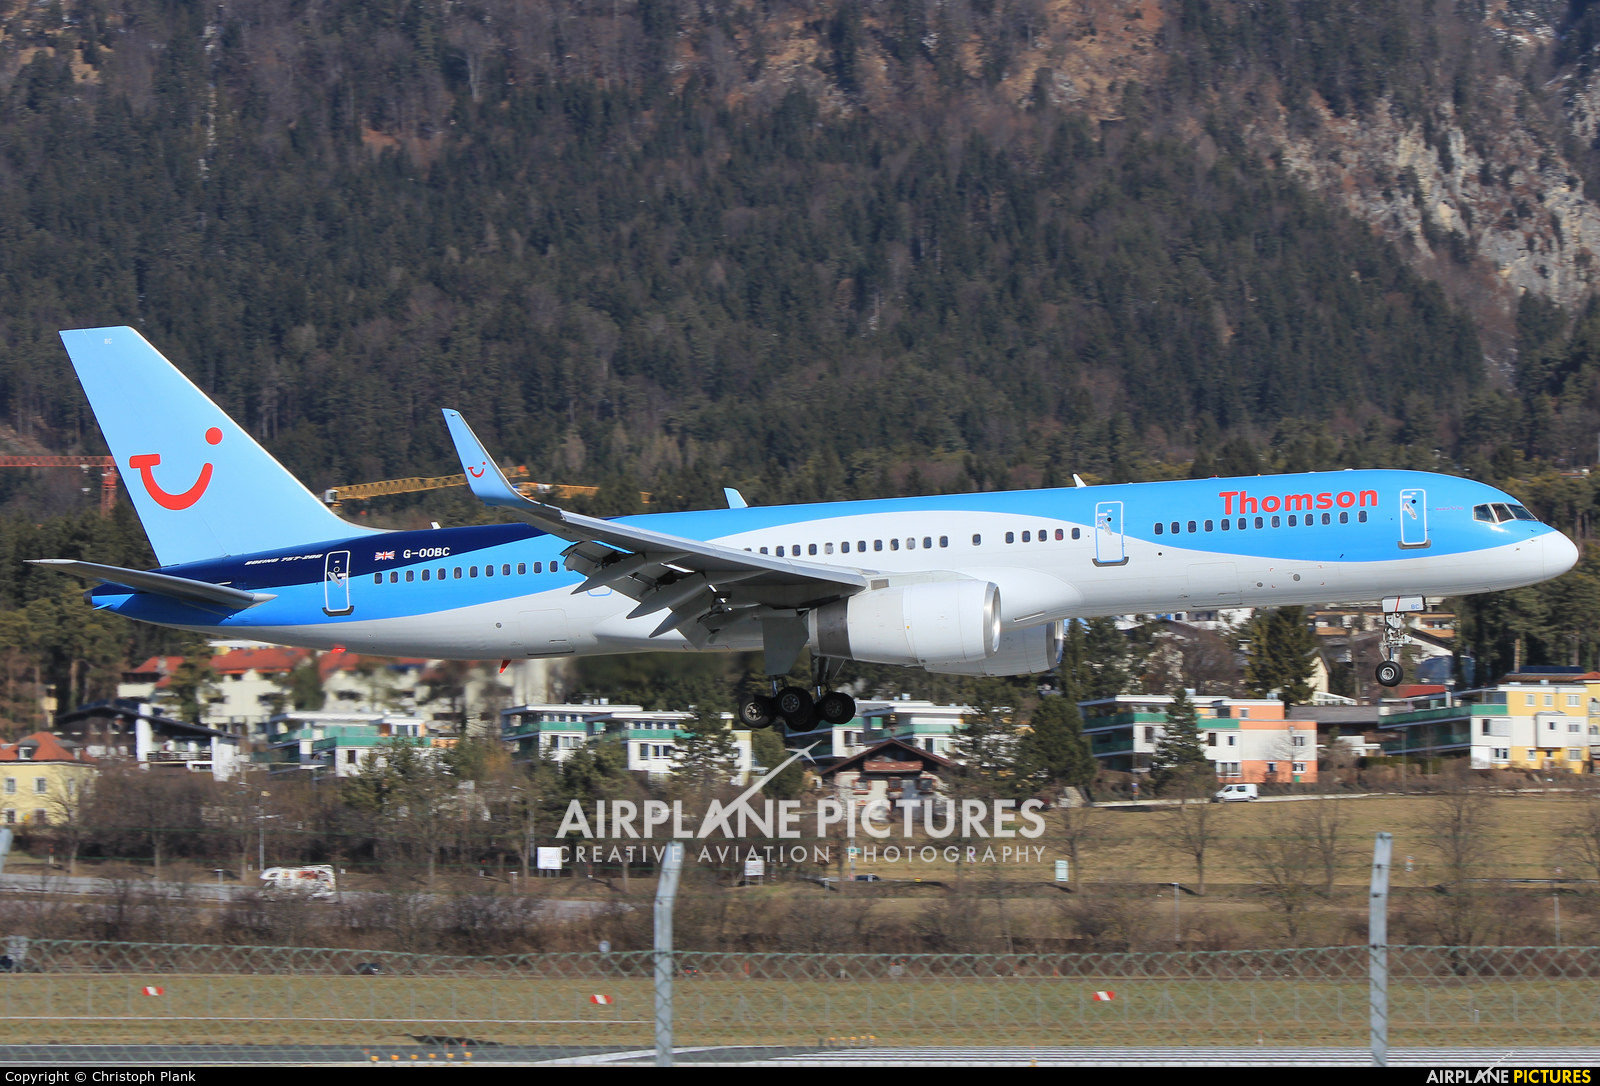 Thomson/Thomsonfly G-OOBC aircraft at Innsbruck